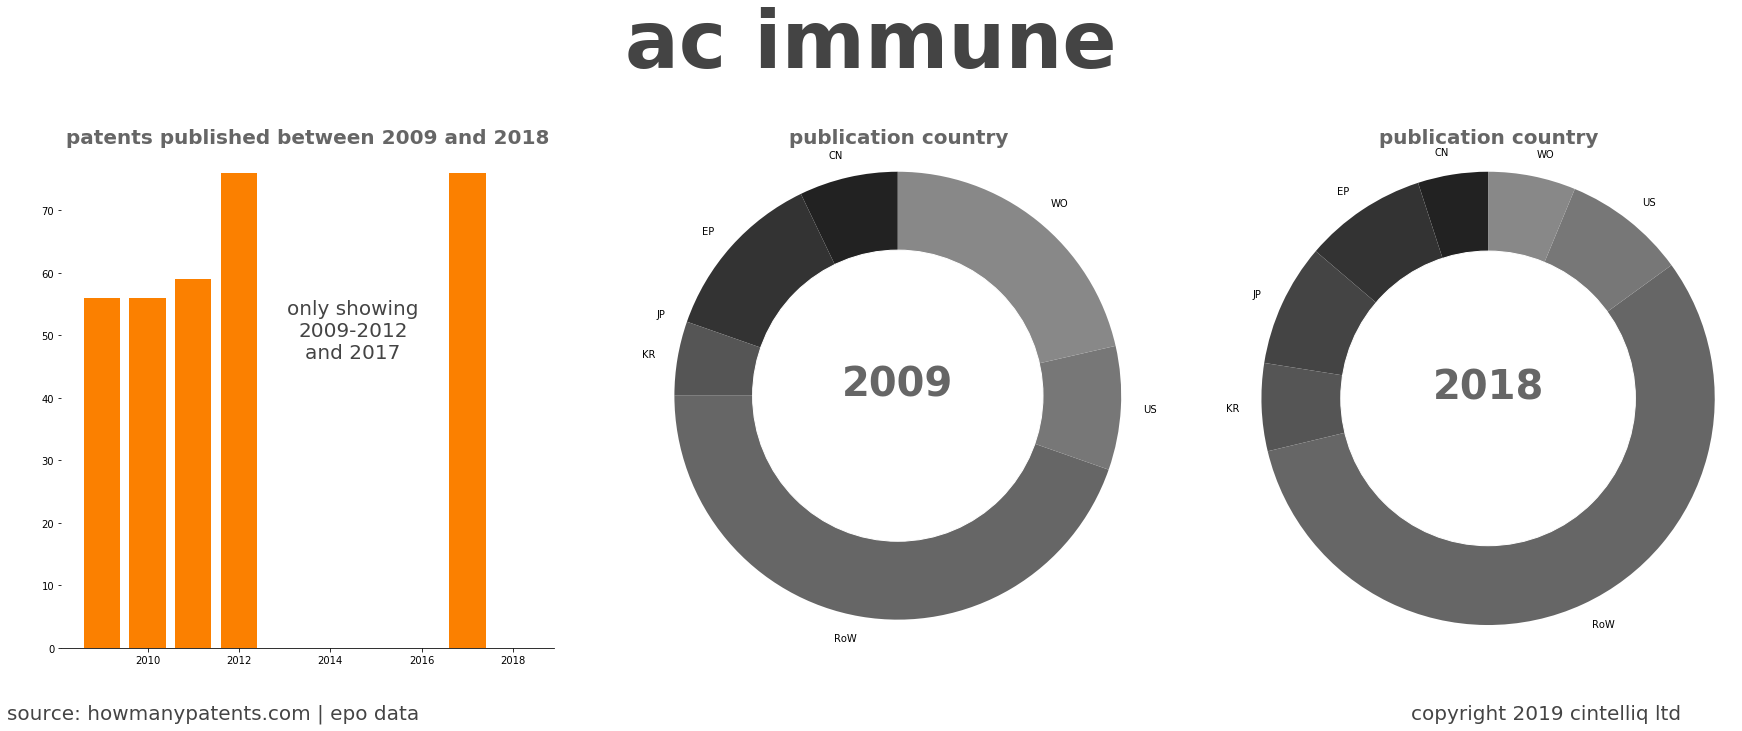 summary of patents for Ac Immune